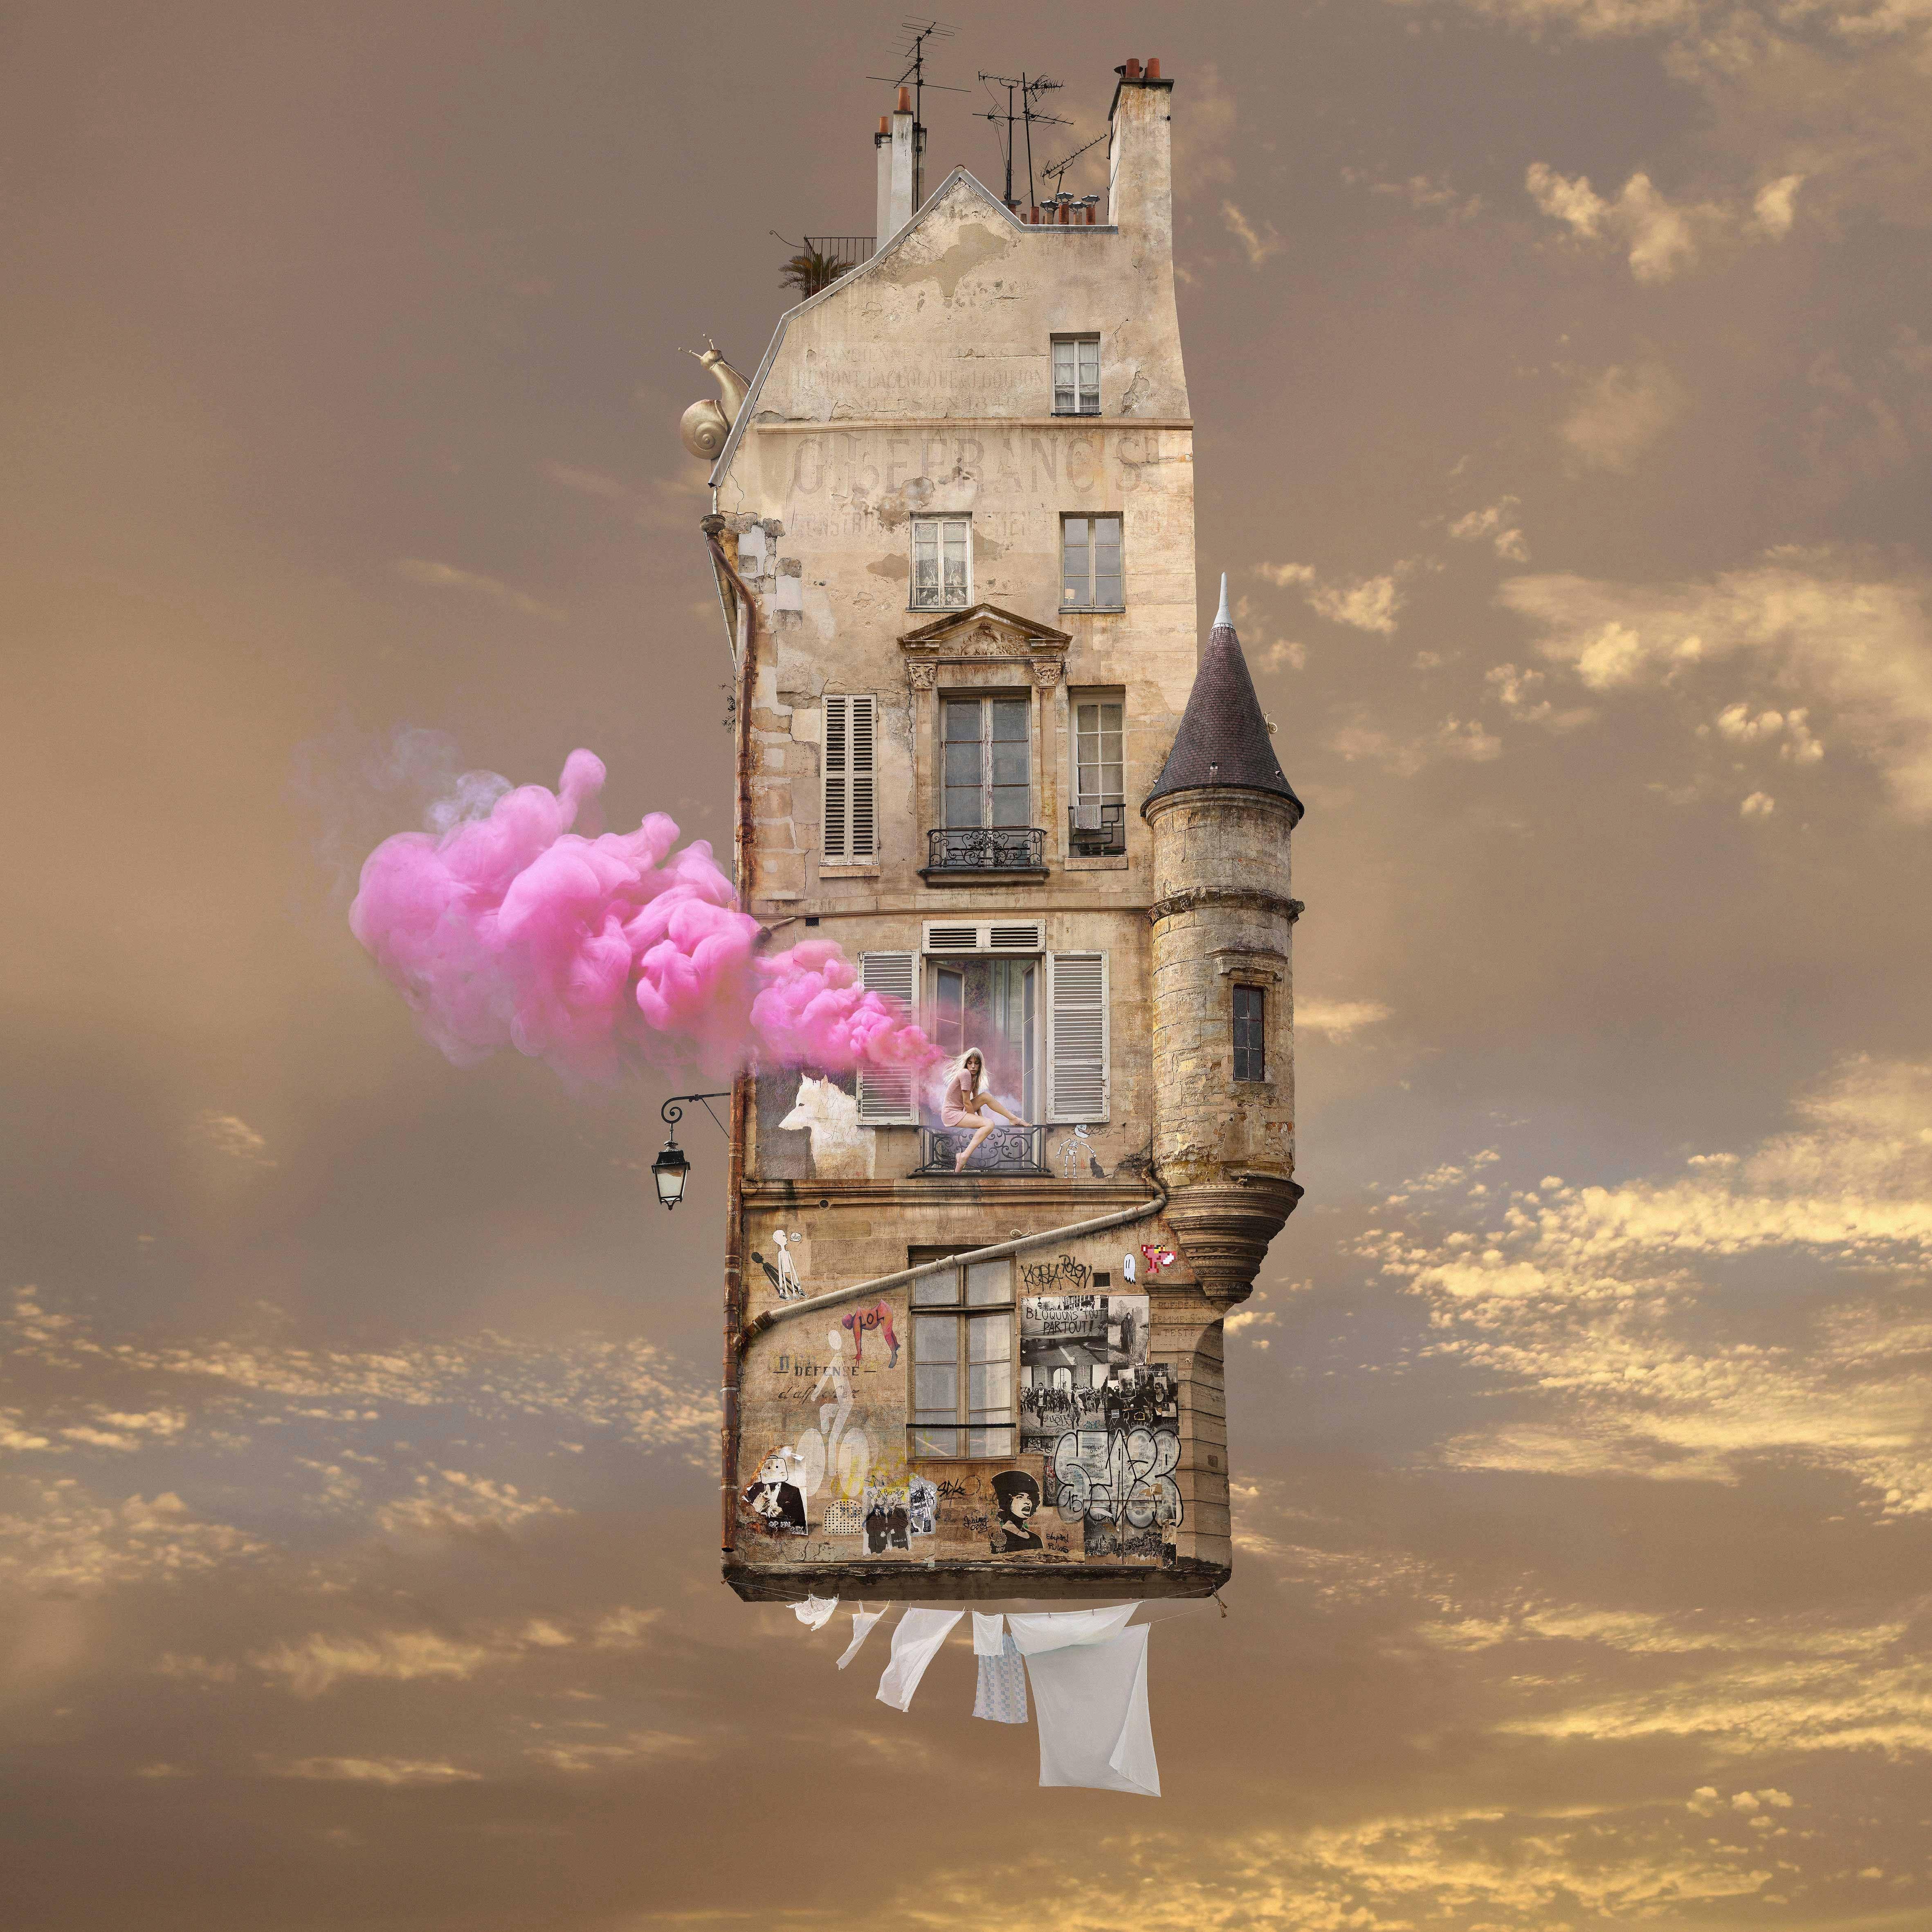 Laurent Chéhère Color Photograph - Pink - digital color whimsical photography of flying house